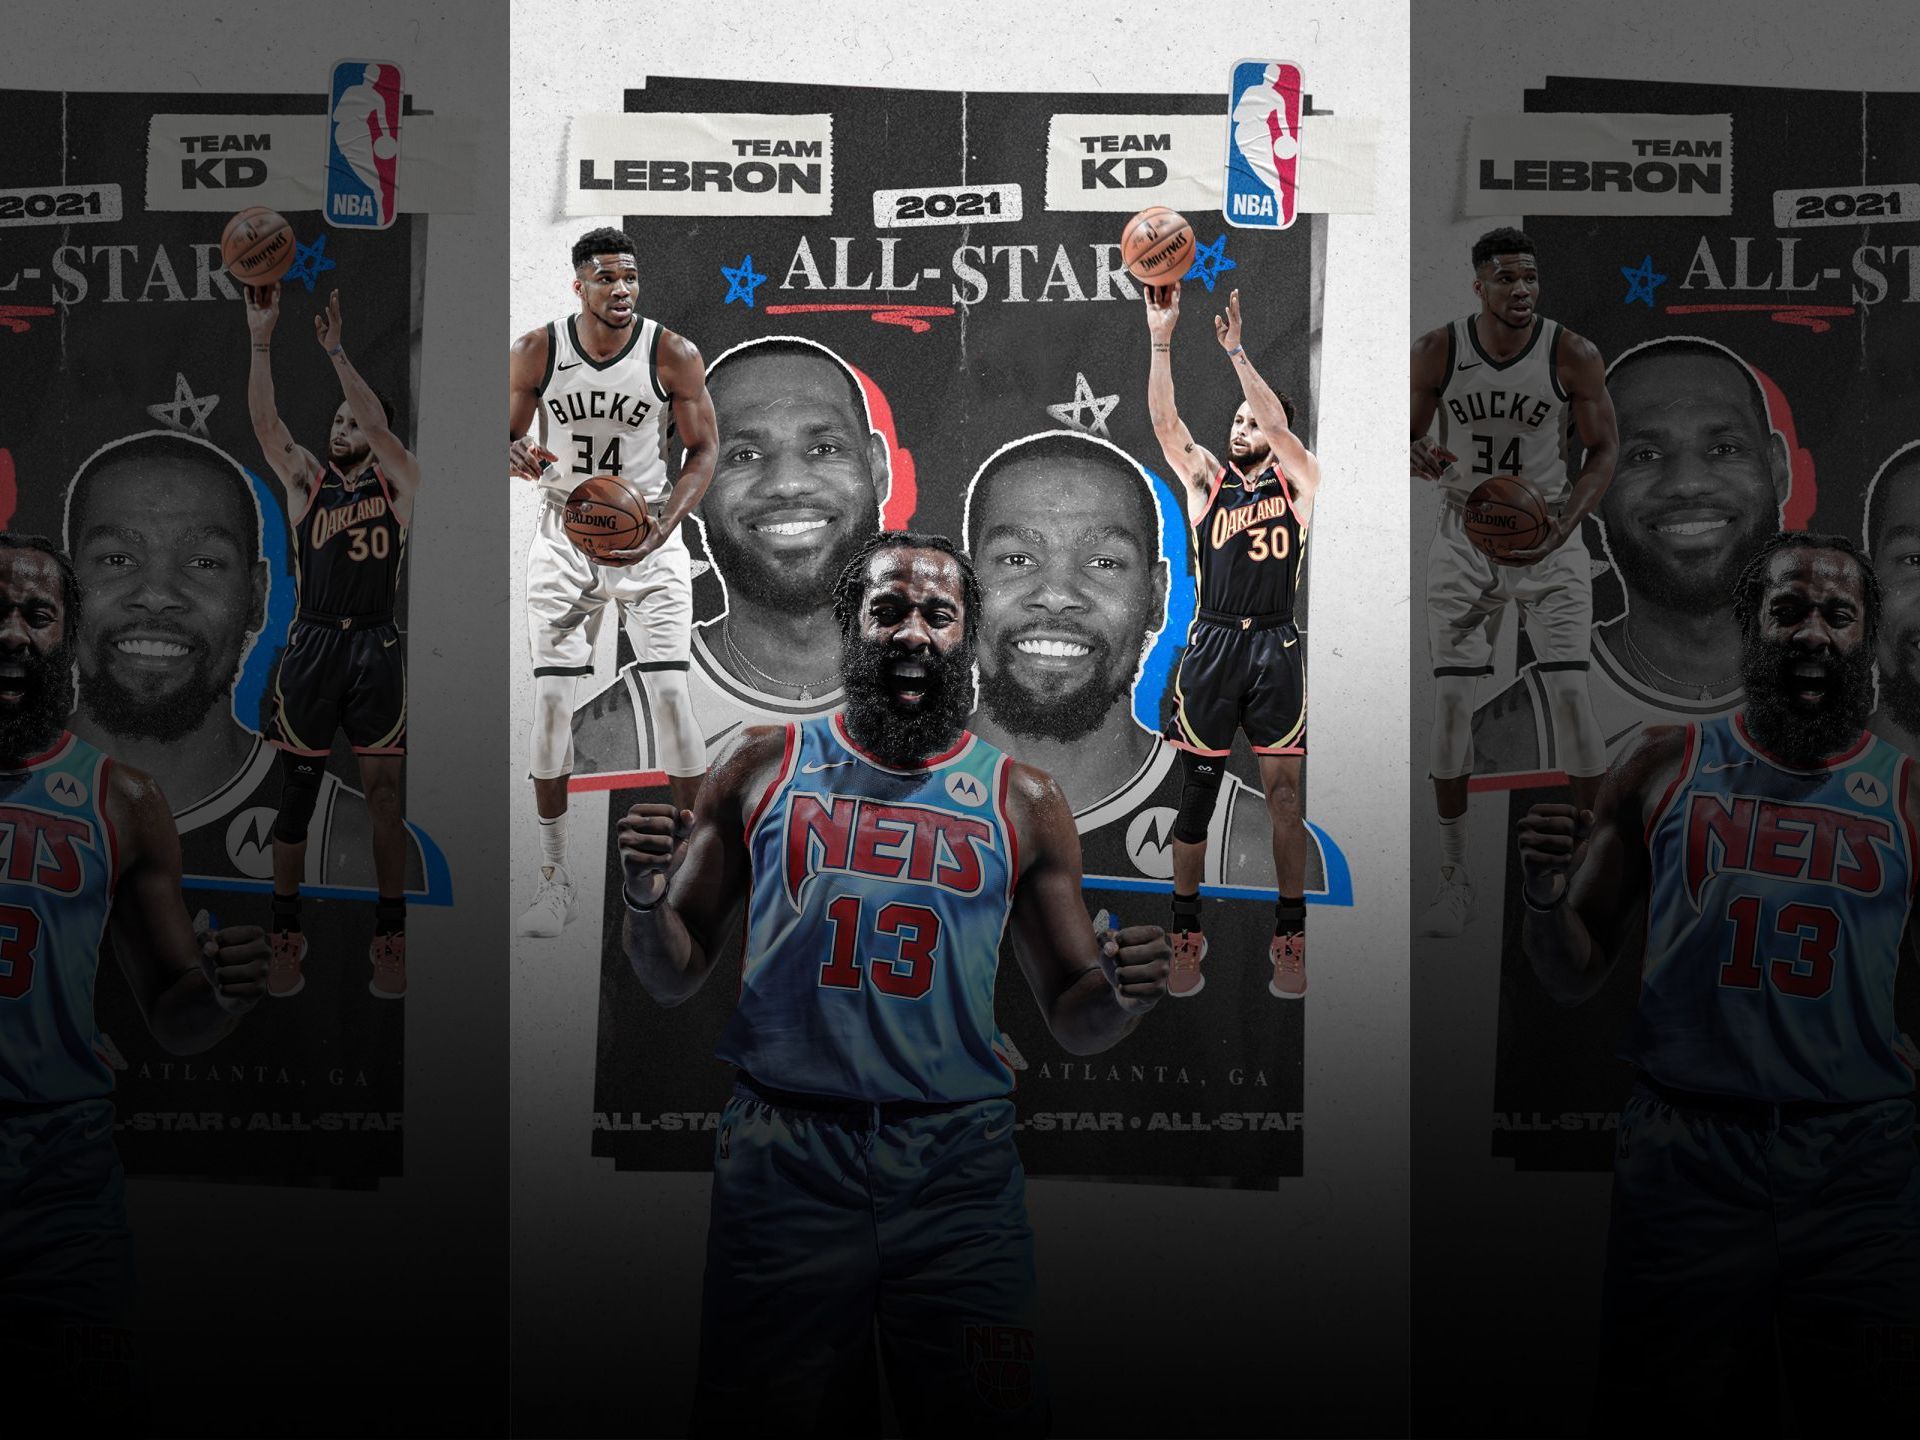 NBA All Star 2021: Rosters, Schedule, Embiid And Simmons Out, Dunk Contest, More